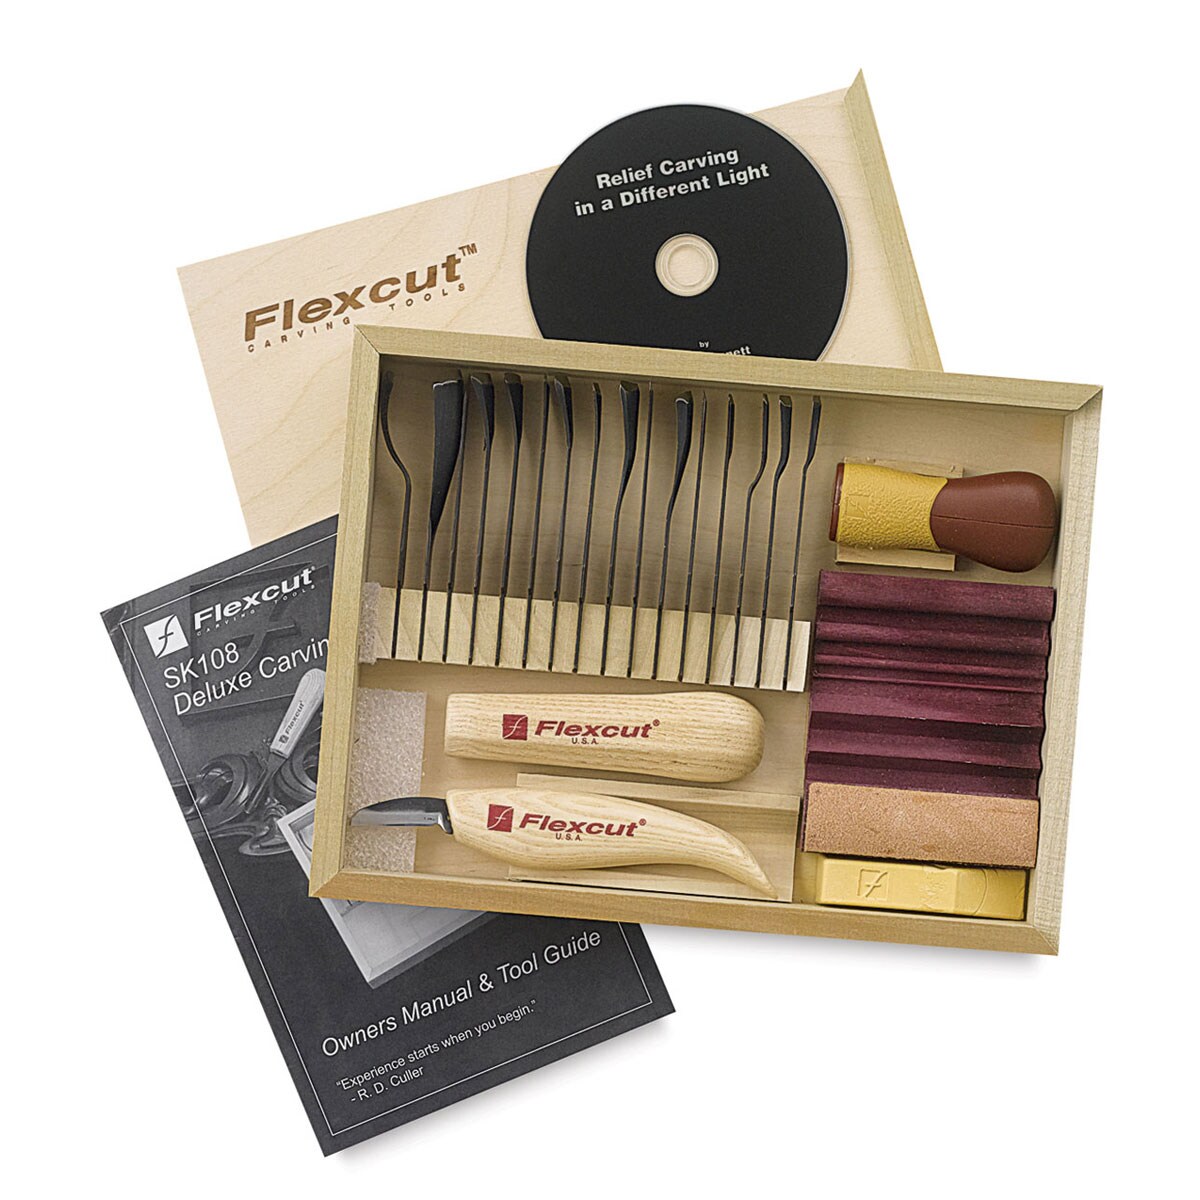 Deluxe Palm And Knife Set By Flexcut